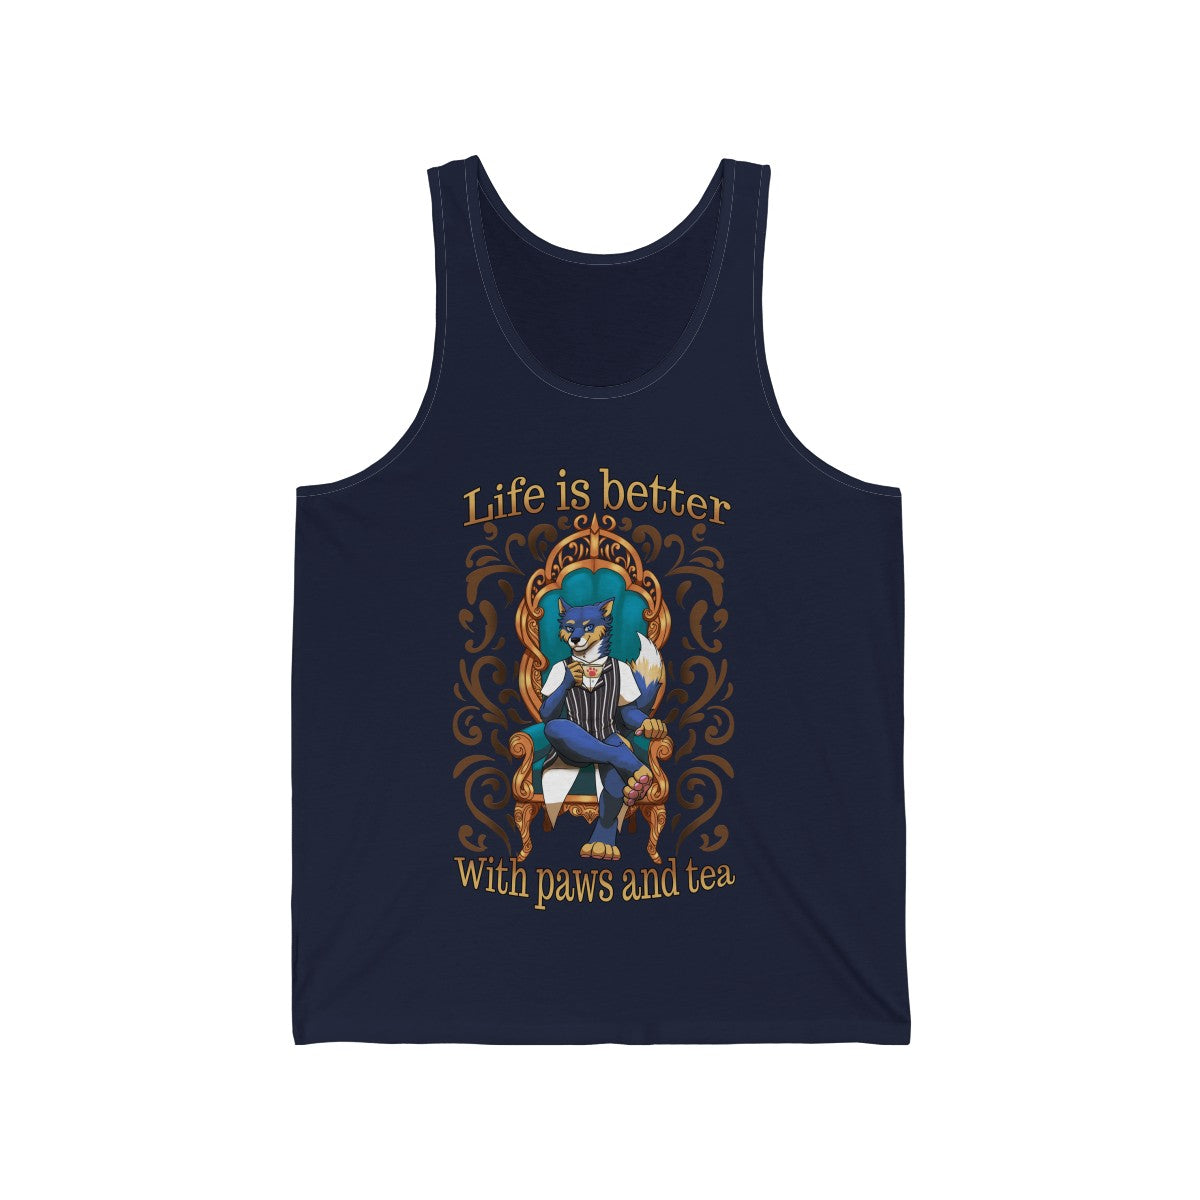 Life is better with Paws and Tea - Tank Top Tank Top Artemis Wishfoot Navy Blue XS 